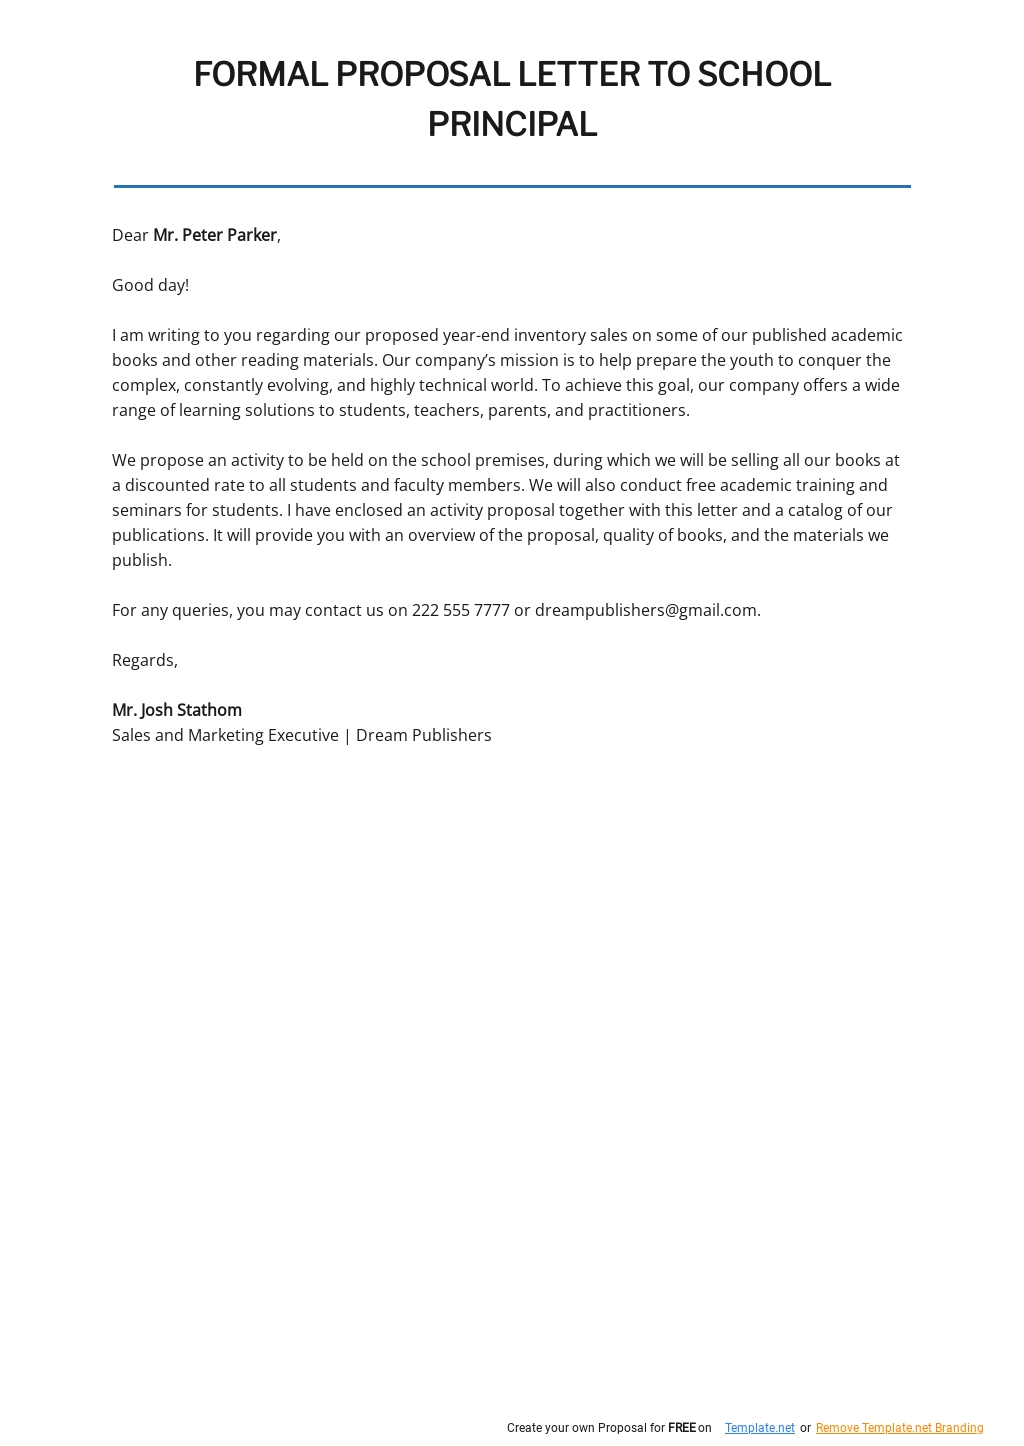 Formal Proposal Letter to School Principal Template - Google Docs, Word